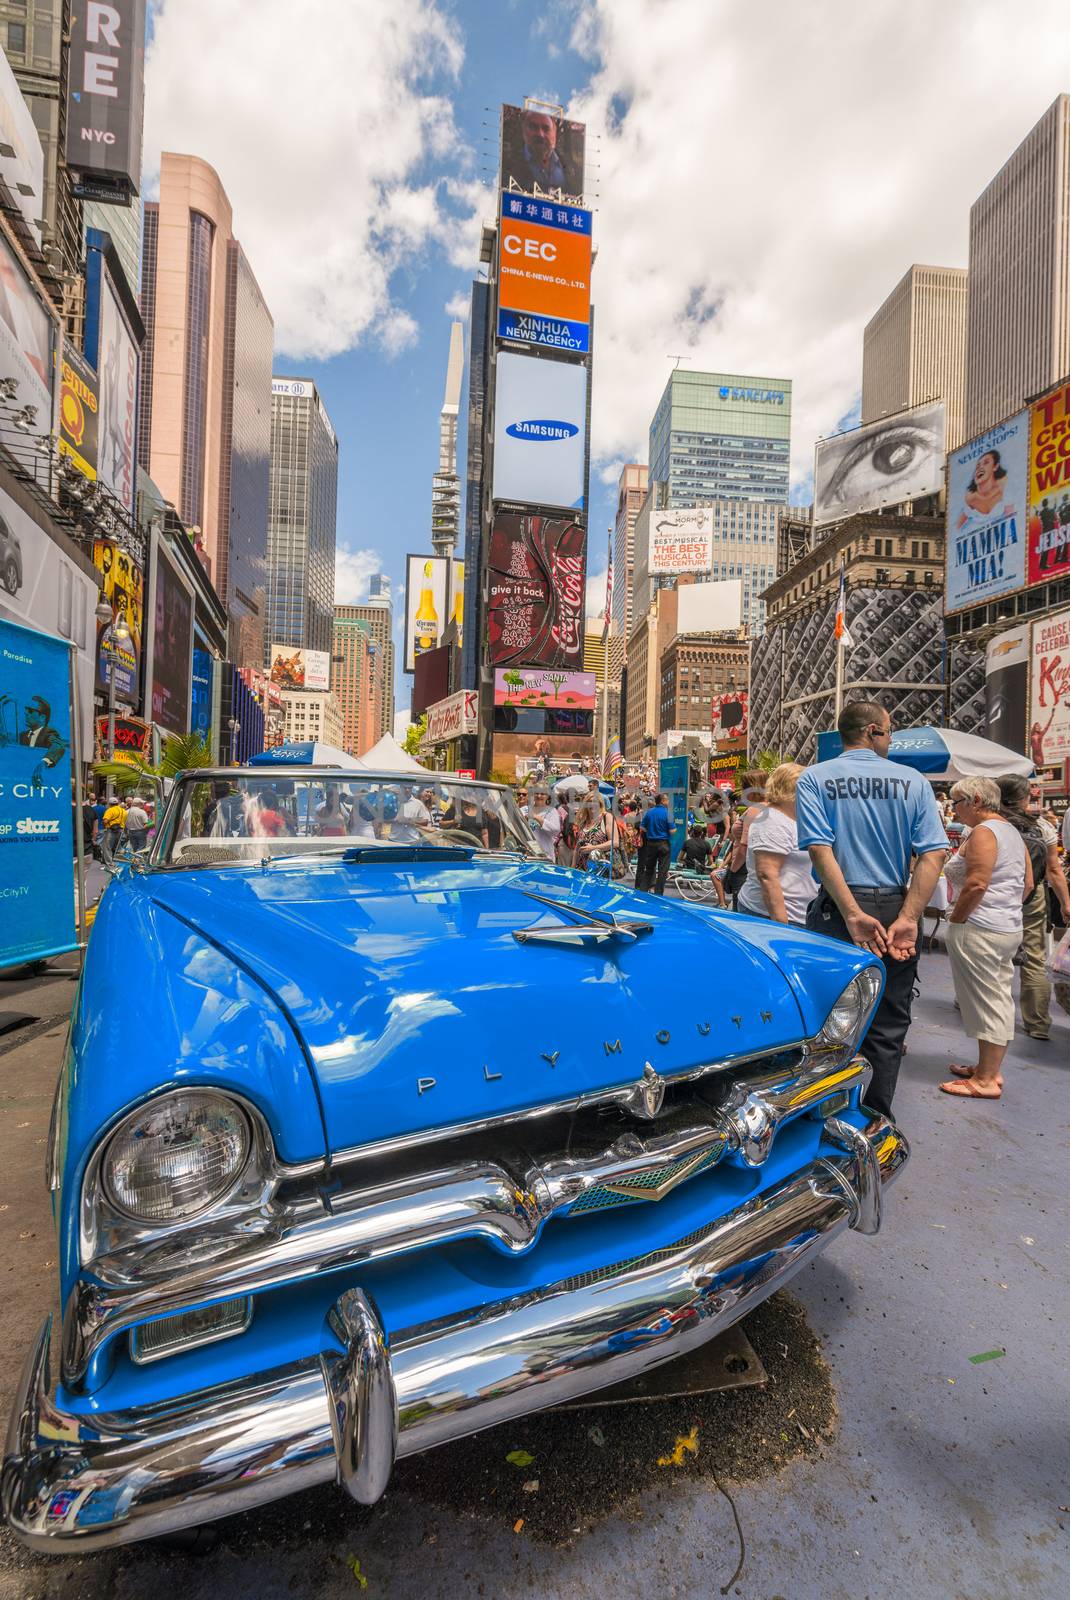 NEW YORK CITY - JUNE 12, 2013: Vintage car in Times Square on a by jovannig